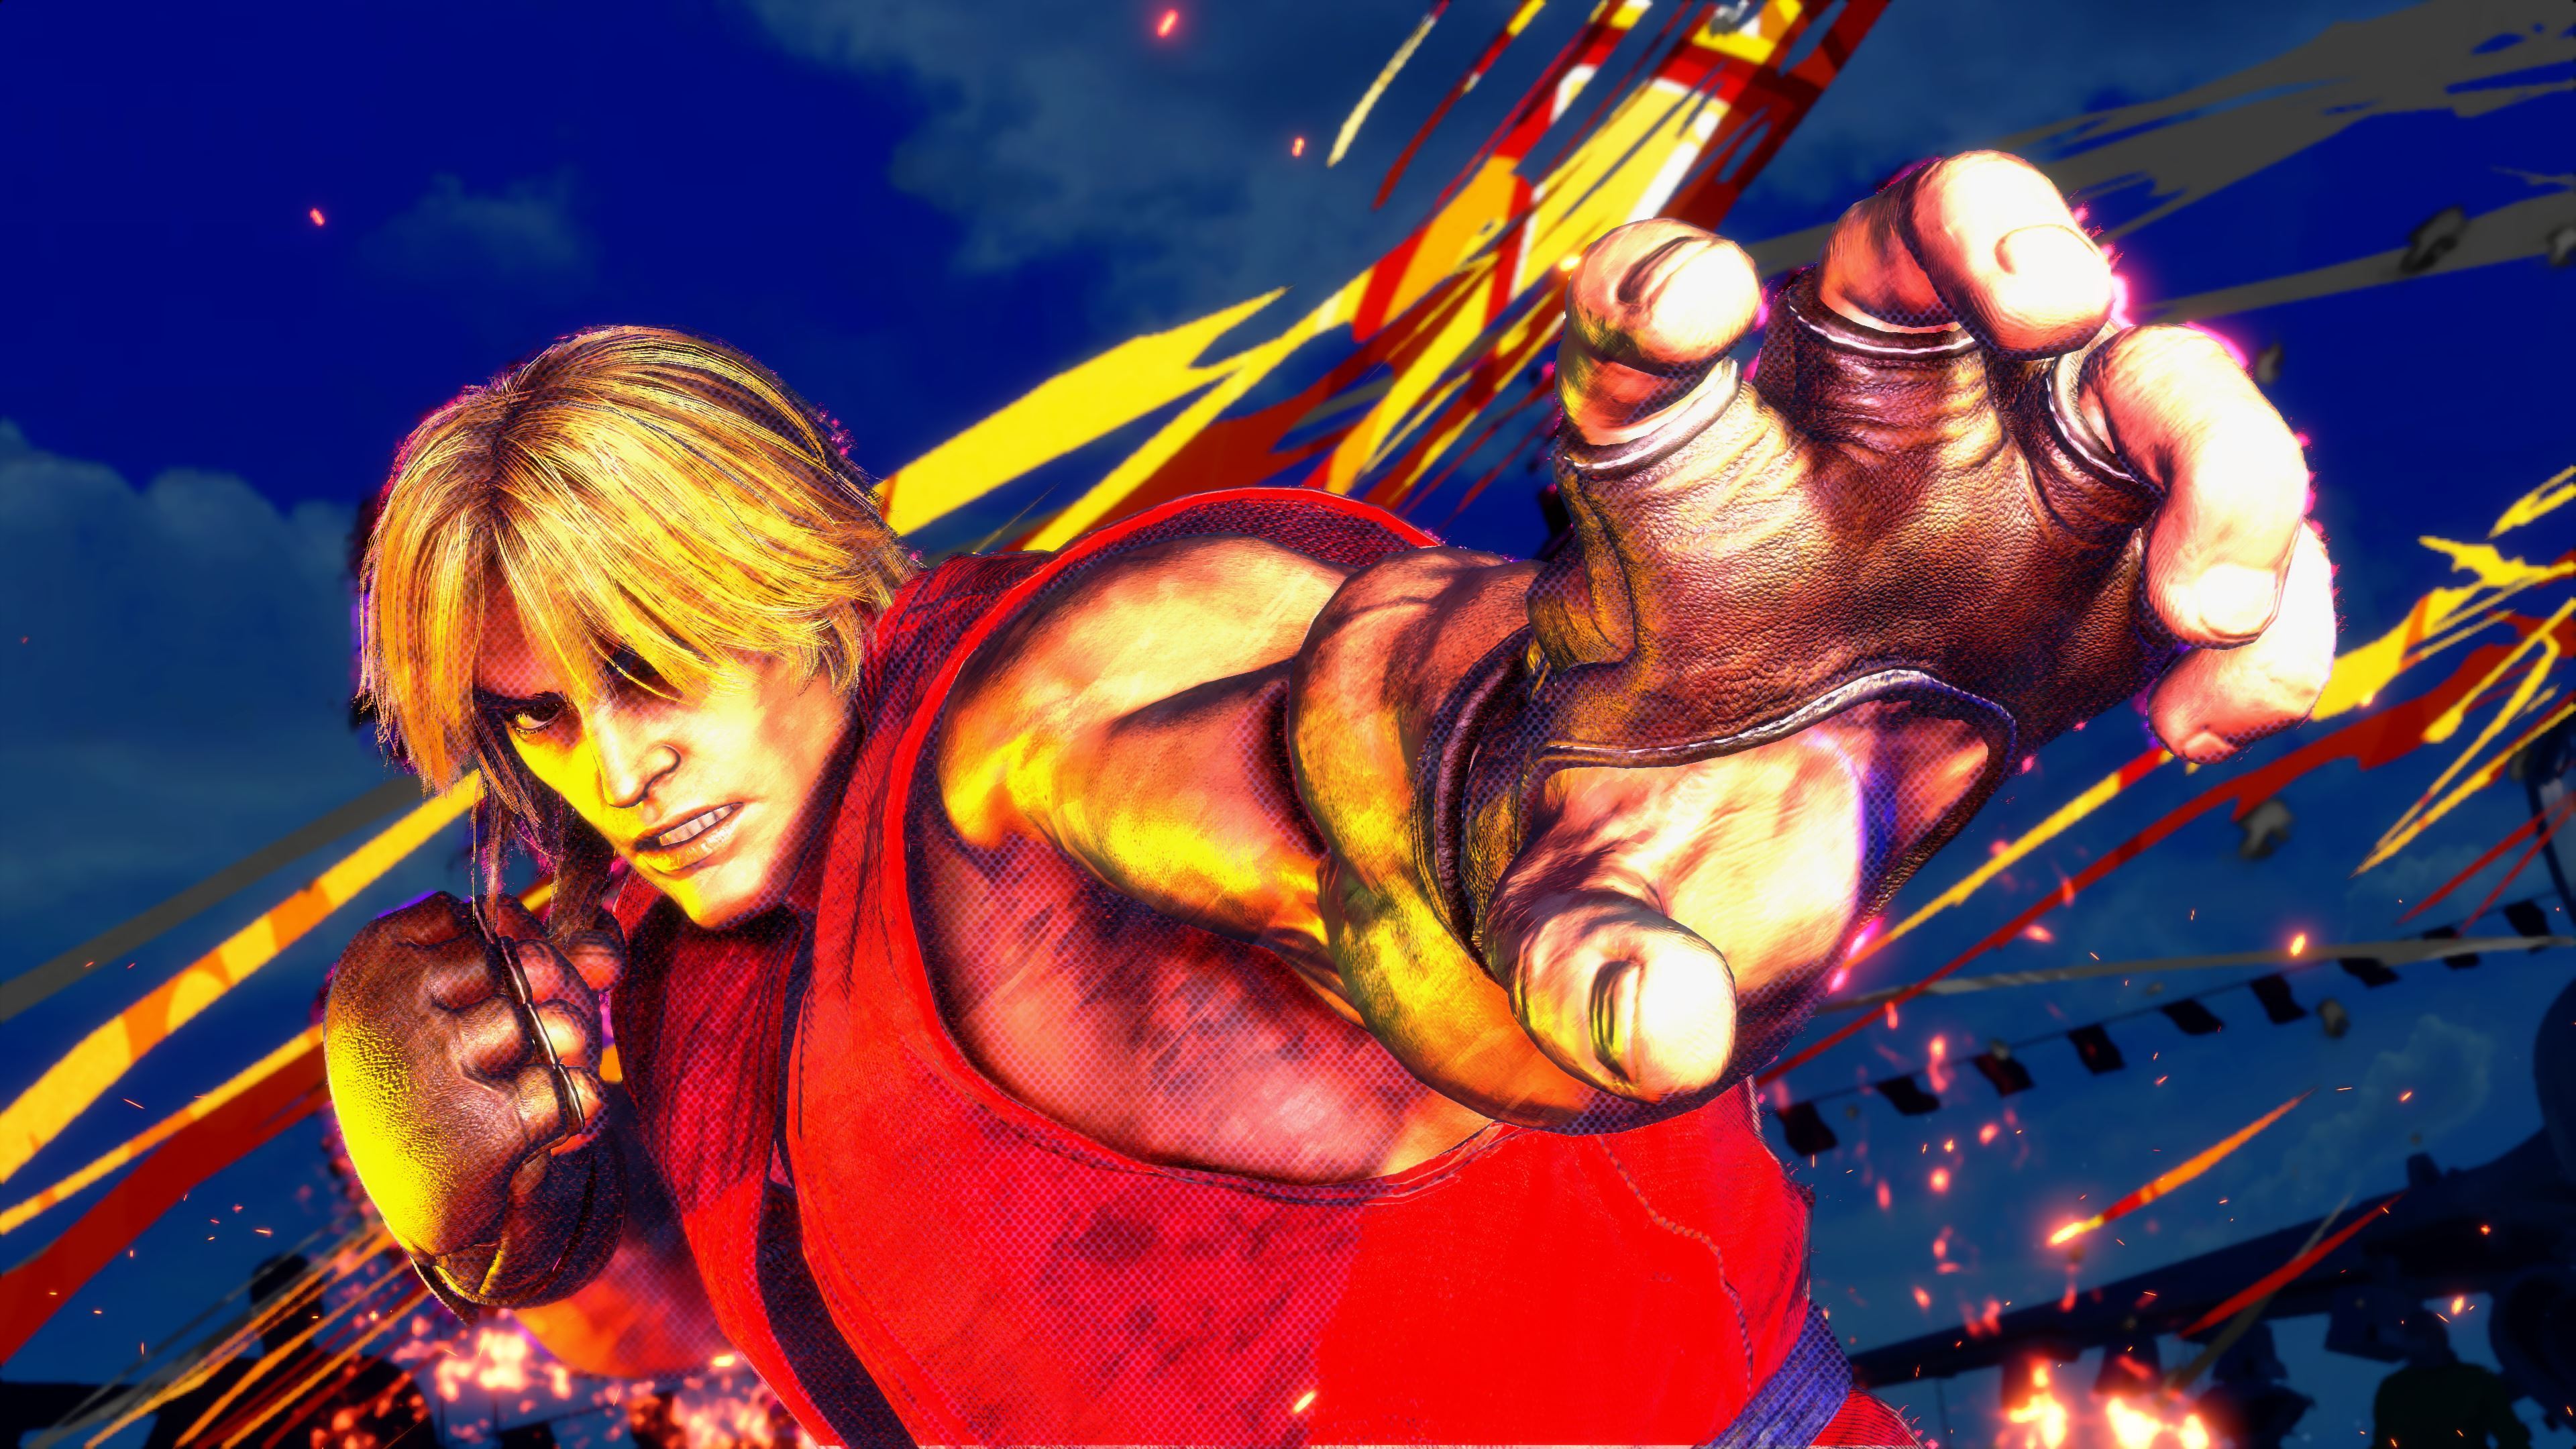 The Animation Flourishes of Street Fighter V - An Appreciation (a